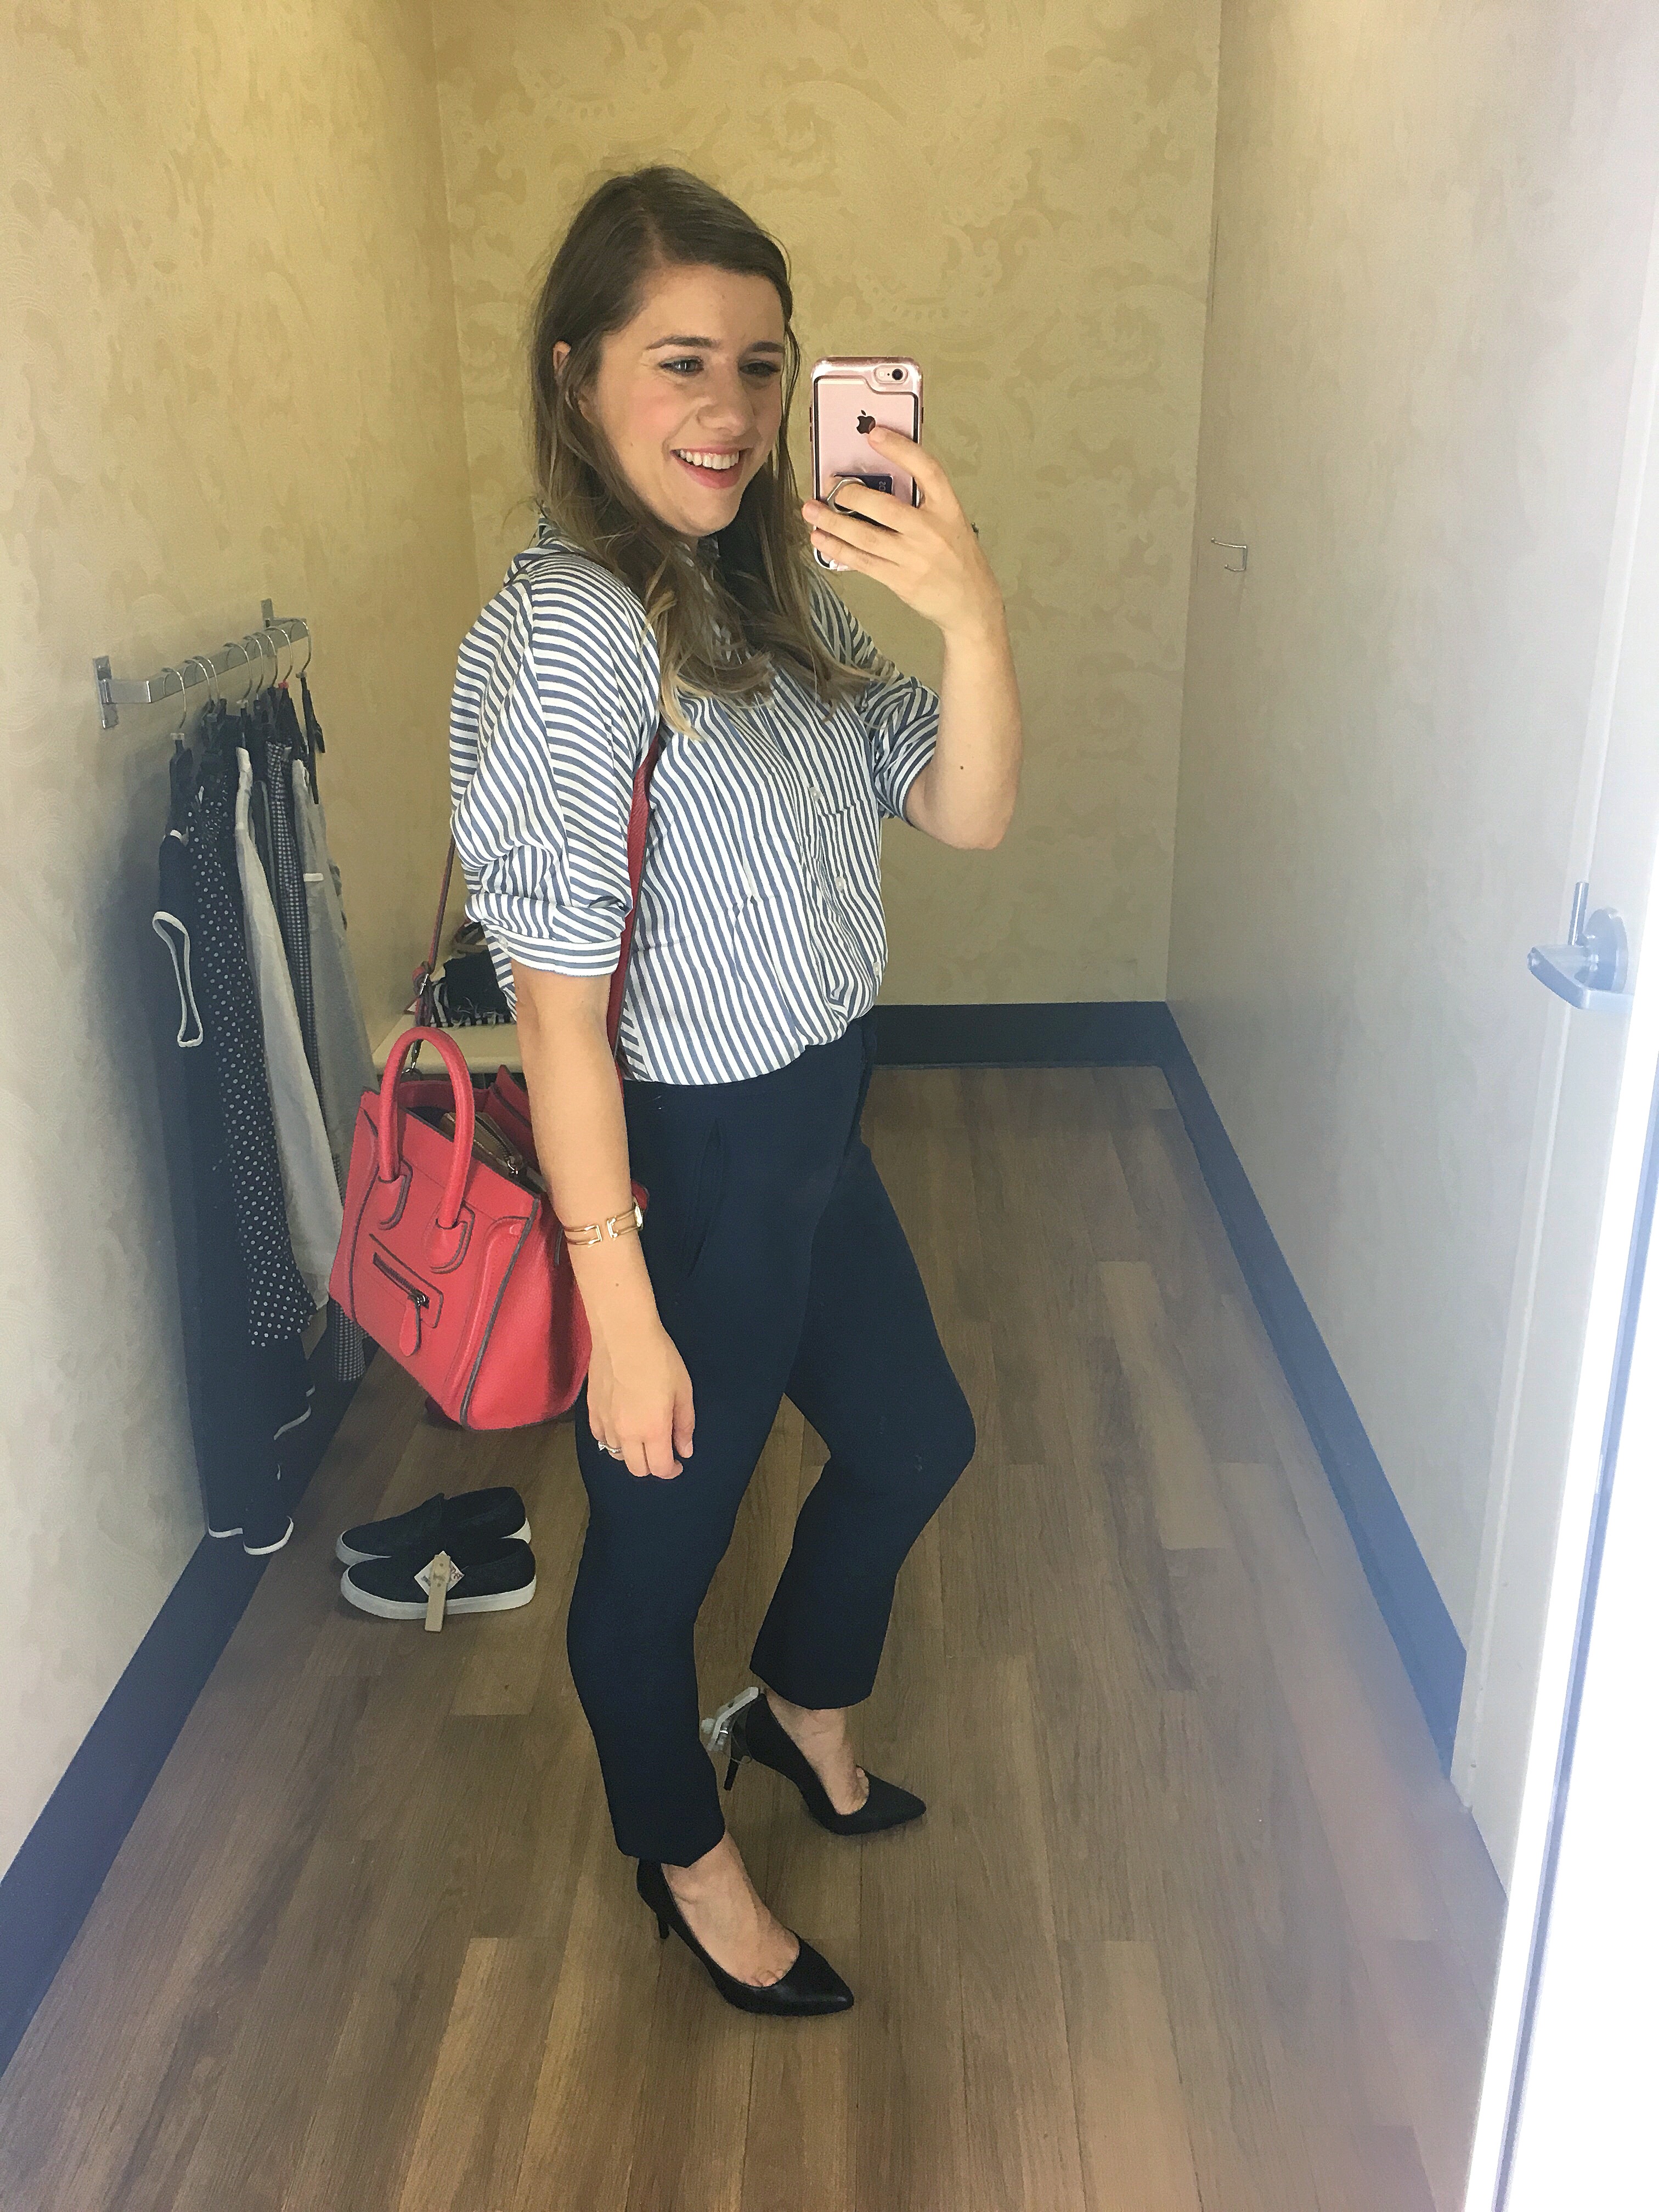 work to weekend - outfit under $50 - TJ Maxx style - Maxx50Challenge